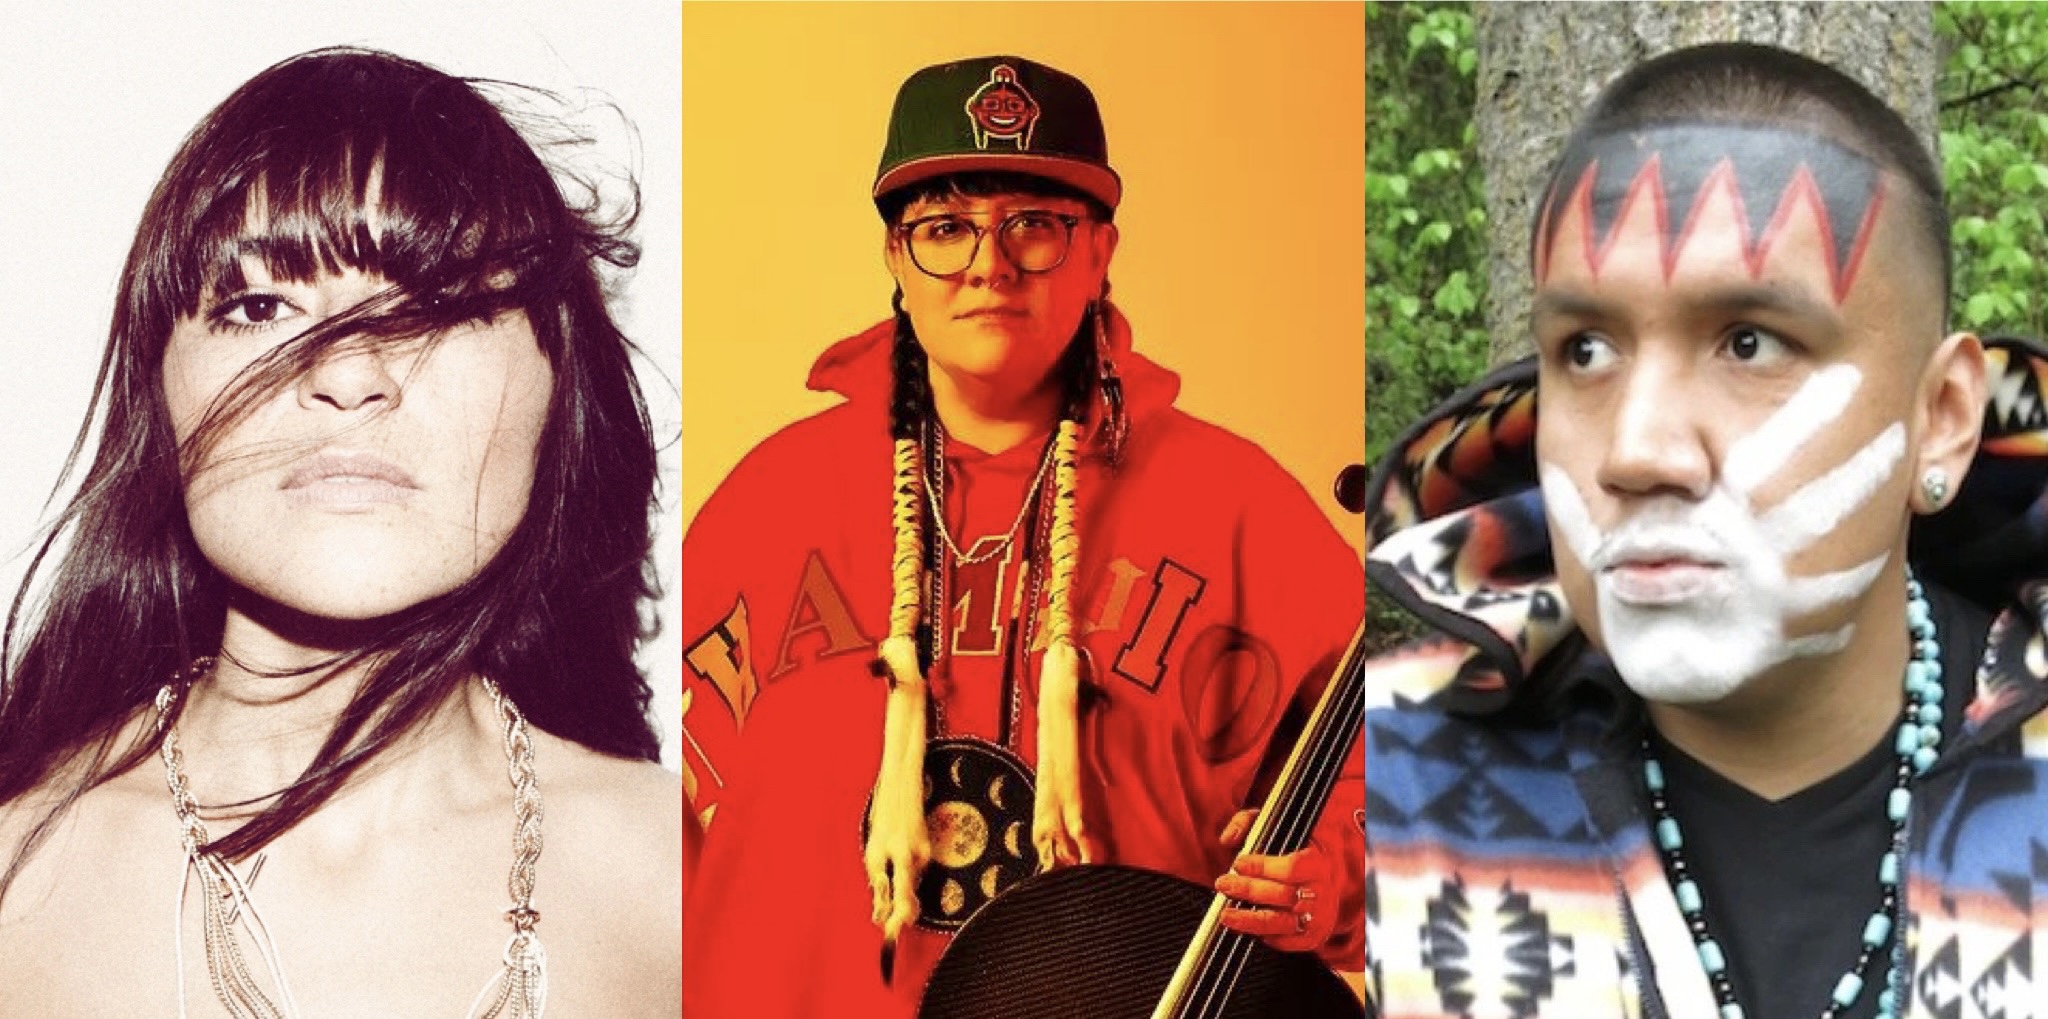 POP Montreal hosts a free concert for National Indigenous Peoples Day on June 21